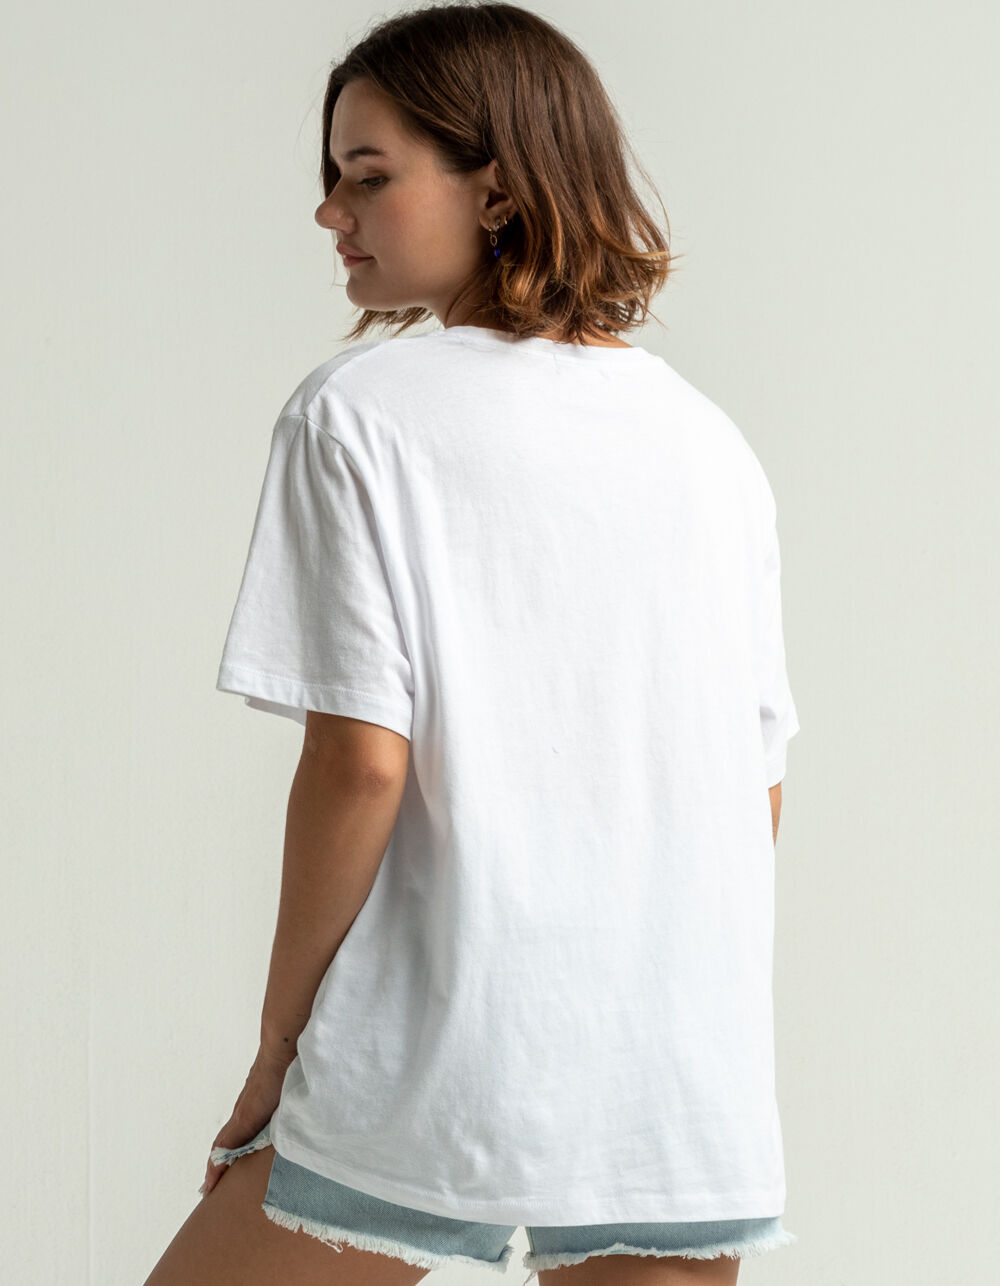 CHARLIE HOLIDAY Free Spirit Womens Tee - WHITE | Tillys